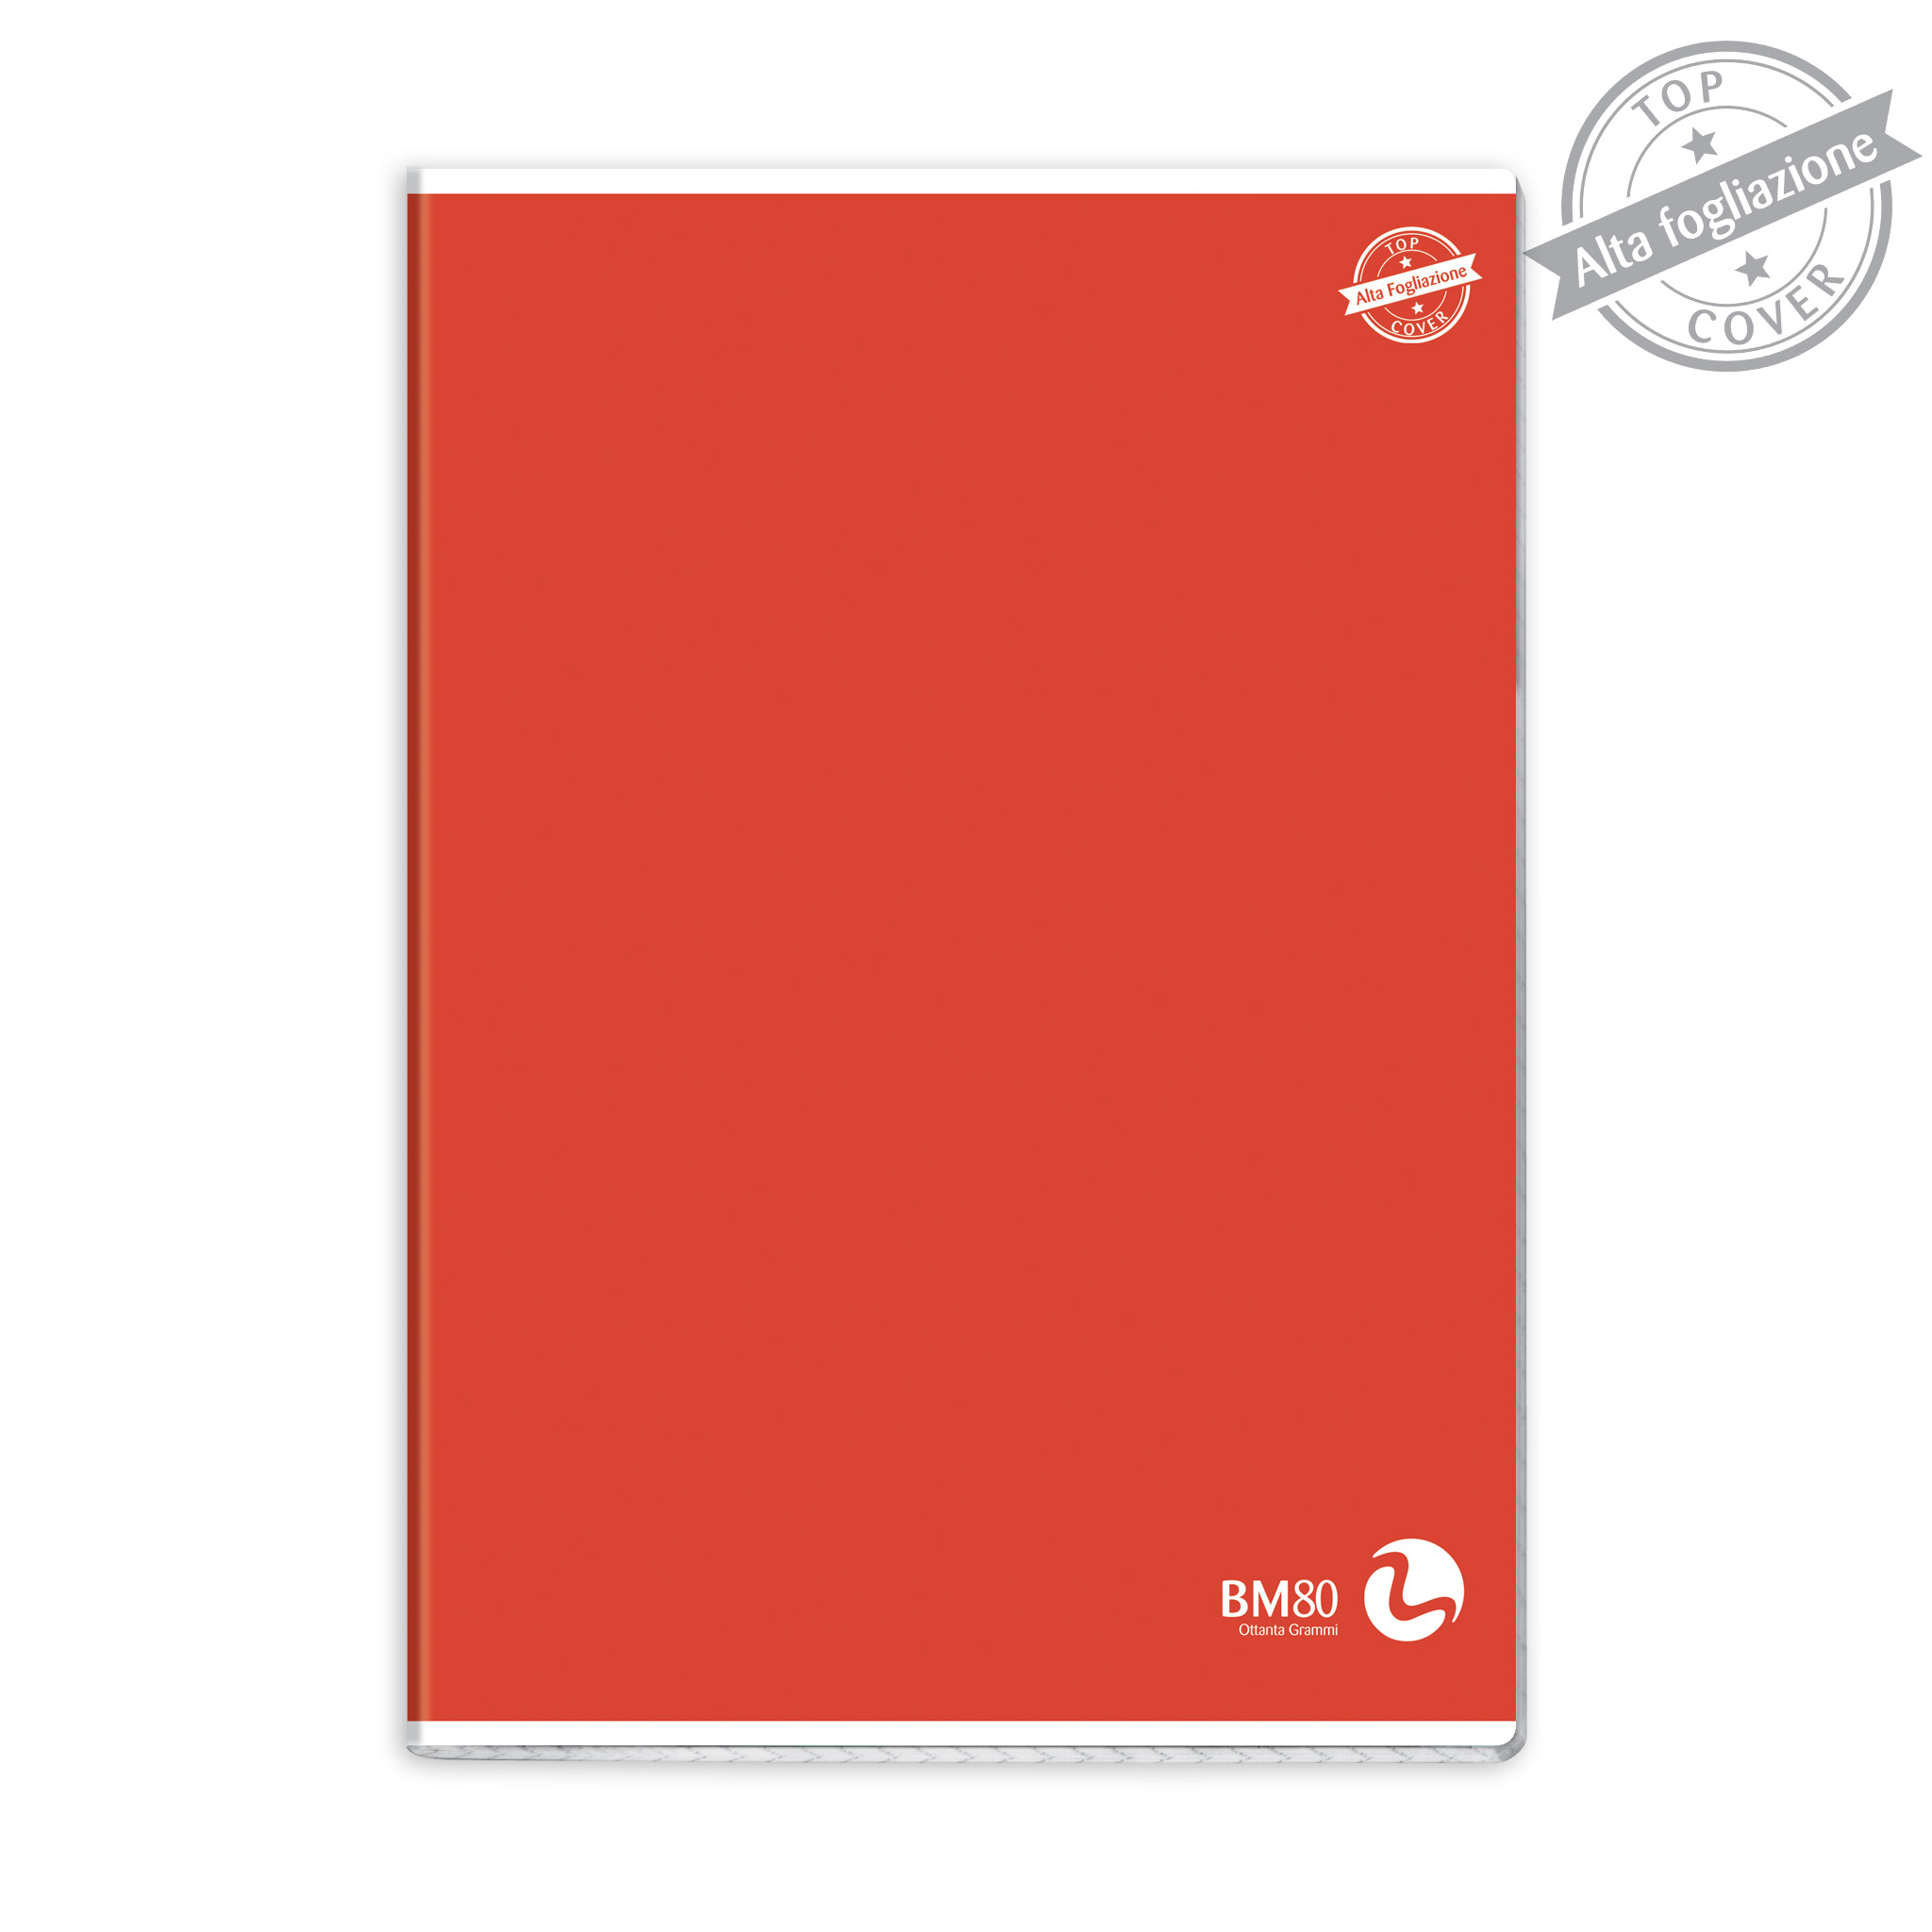 A4 maxi notebooks TOP COVER 80 high pagination - 10 assorted pieces